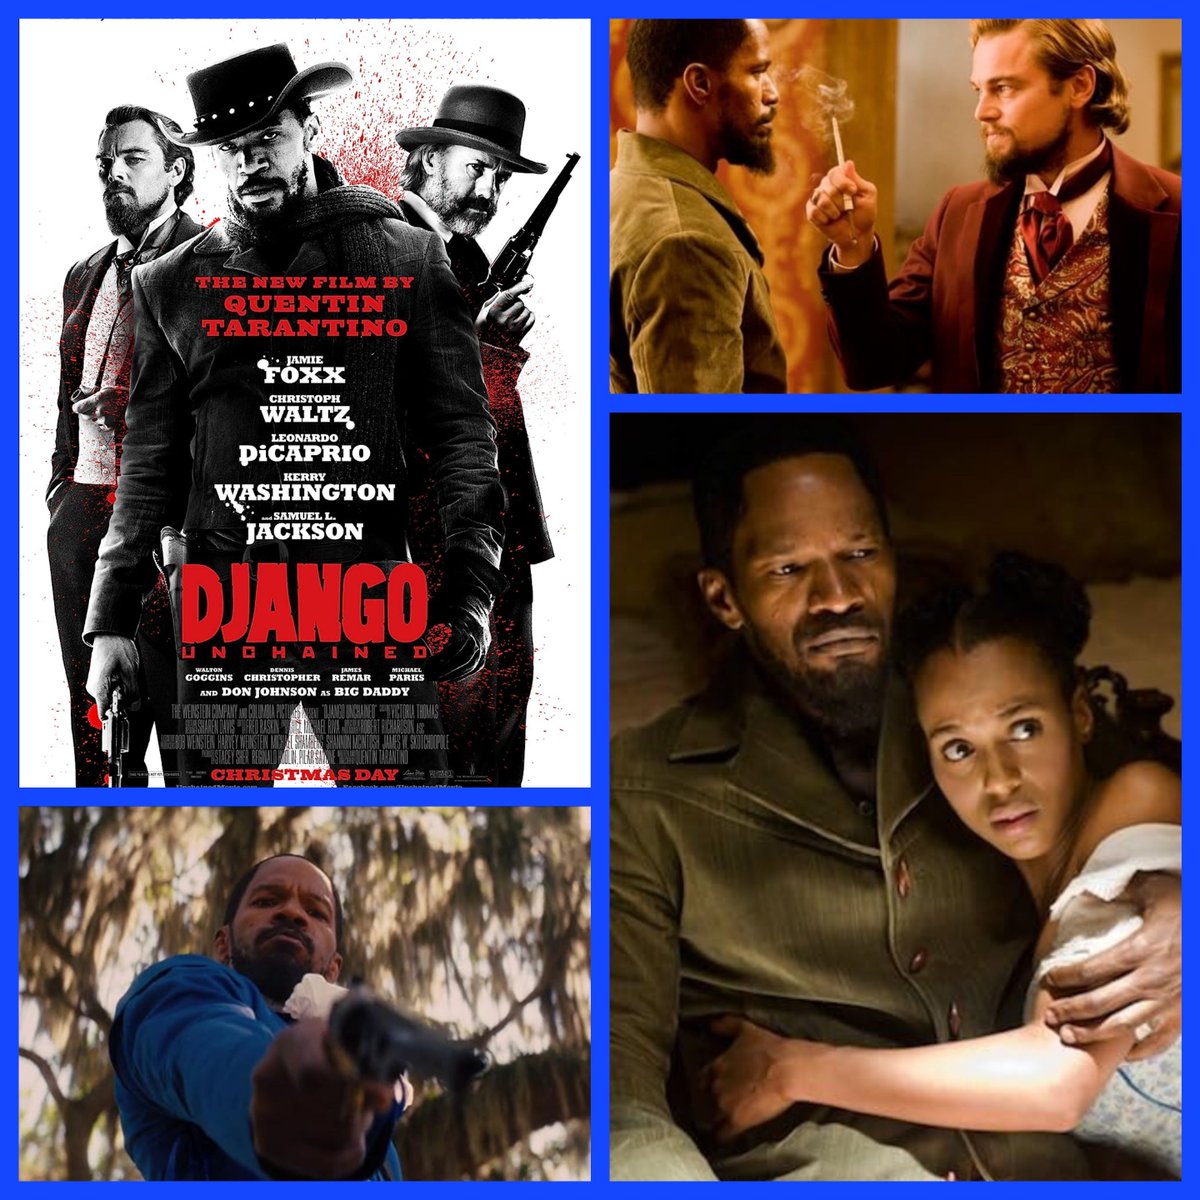 #RevengeMovies #FightBack  #FilmX 

#DjangoUnchained (2012)
With the help of a German bounty-hunter, a freed slave sets out to rescue his wife from a brutal plantation owner in Mississippi.
#JamieFoxx #LeonardoDiCaprio